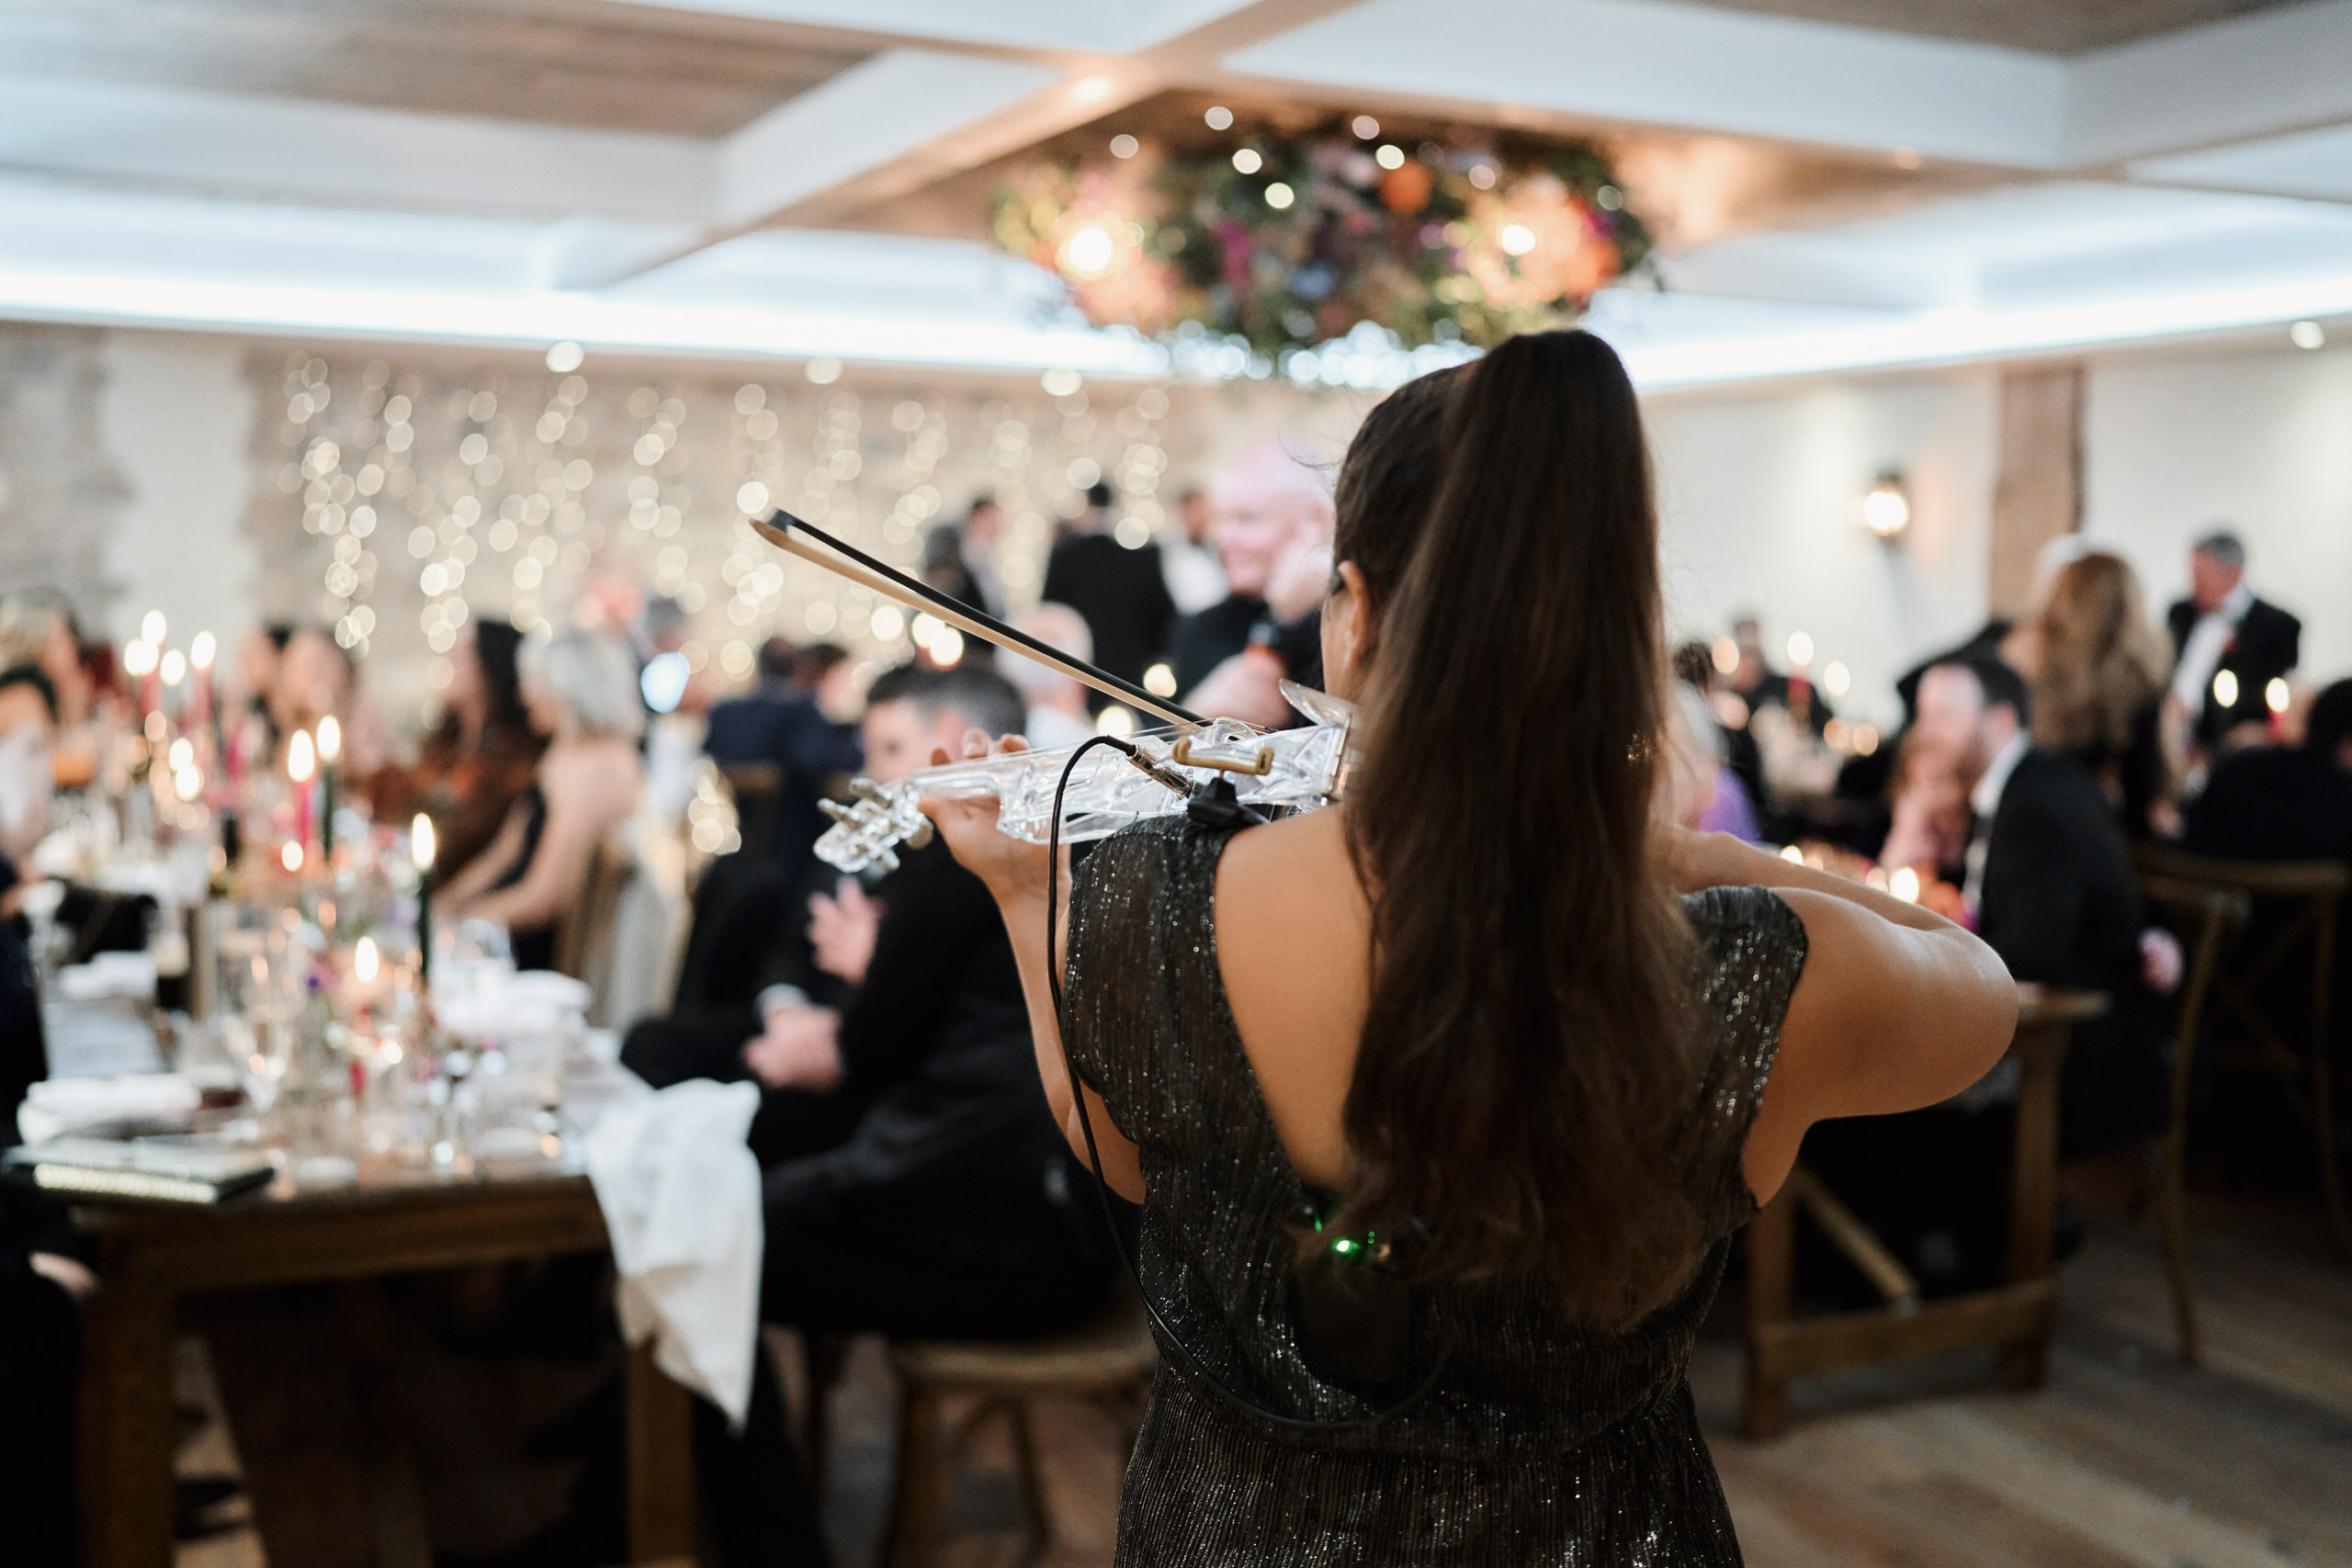 A lady is playing the violin at a wedding party.